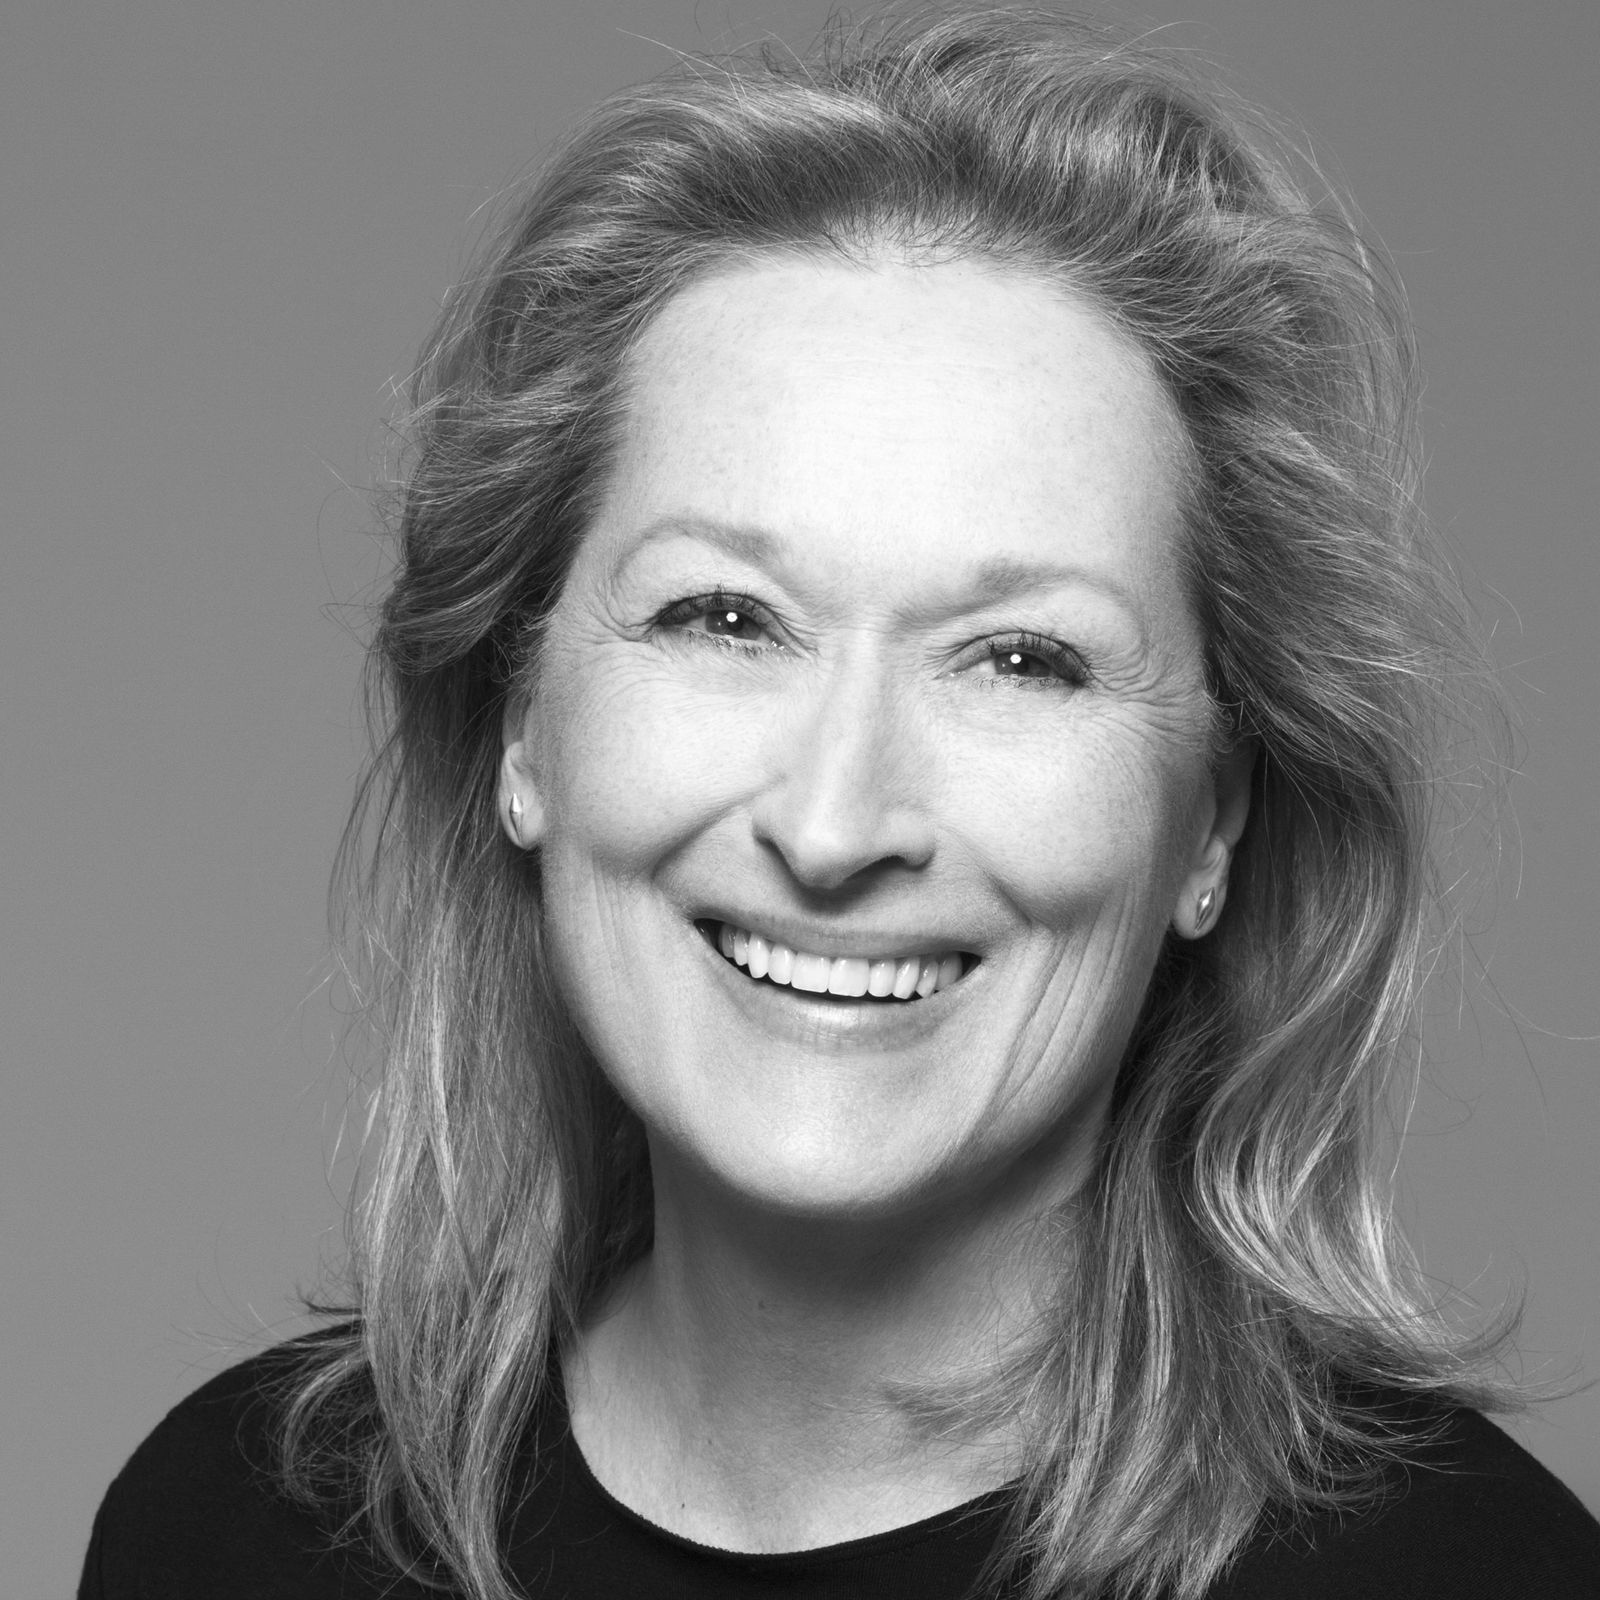 Meryl Streep To Star In ‘Mary Poppins Returns’ As Mary Poppins' Cousin